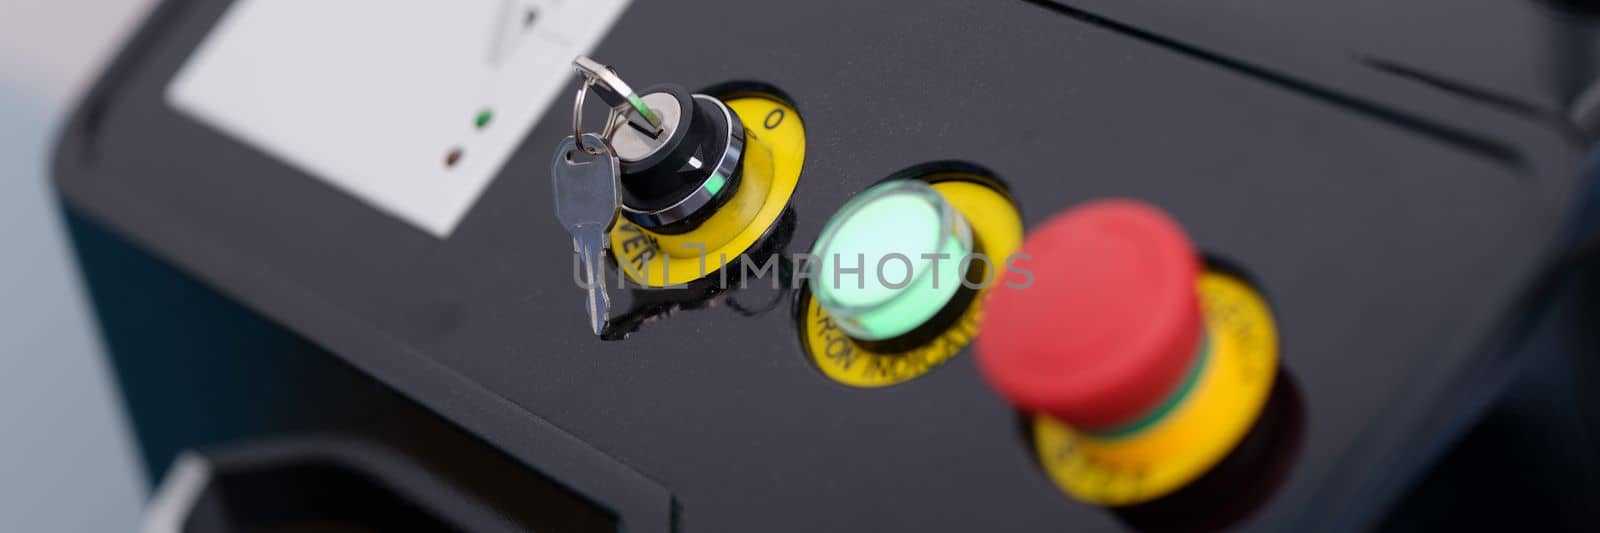 Buttons with key on laser hair removal and blood vessel and acne treatment machine closeup by kuprevich